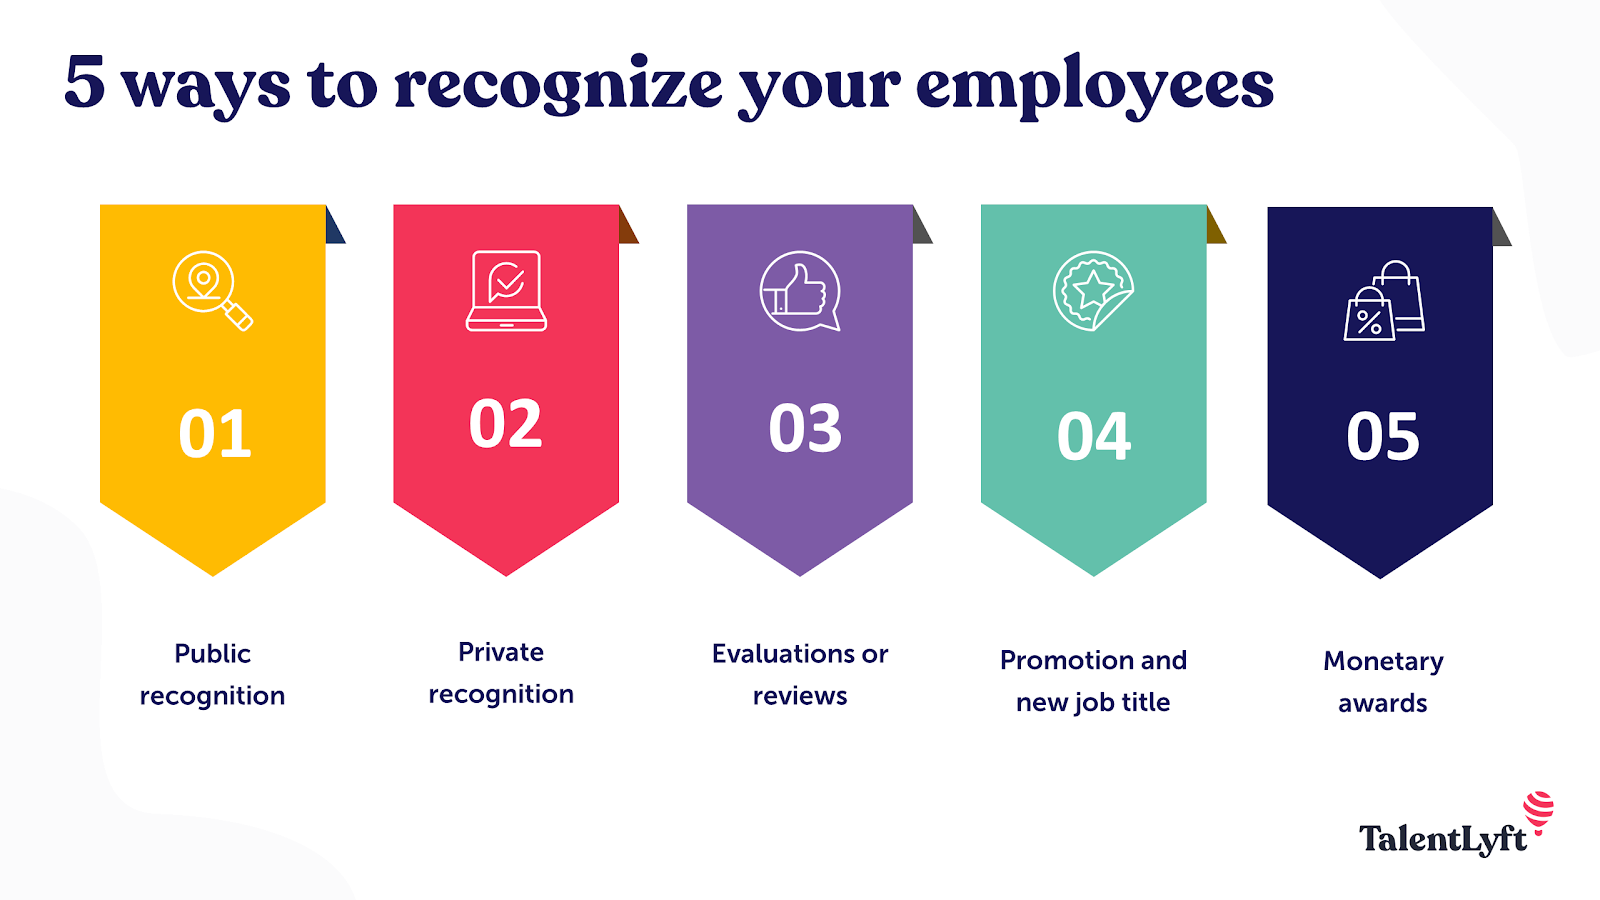 Employee recogntion